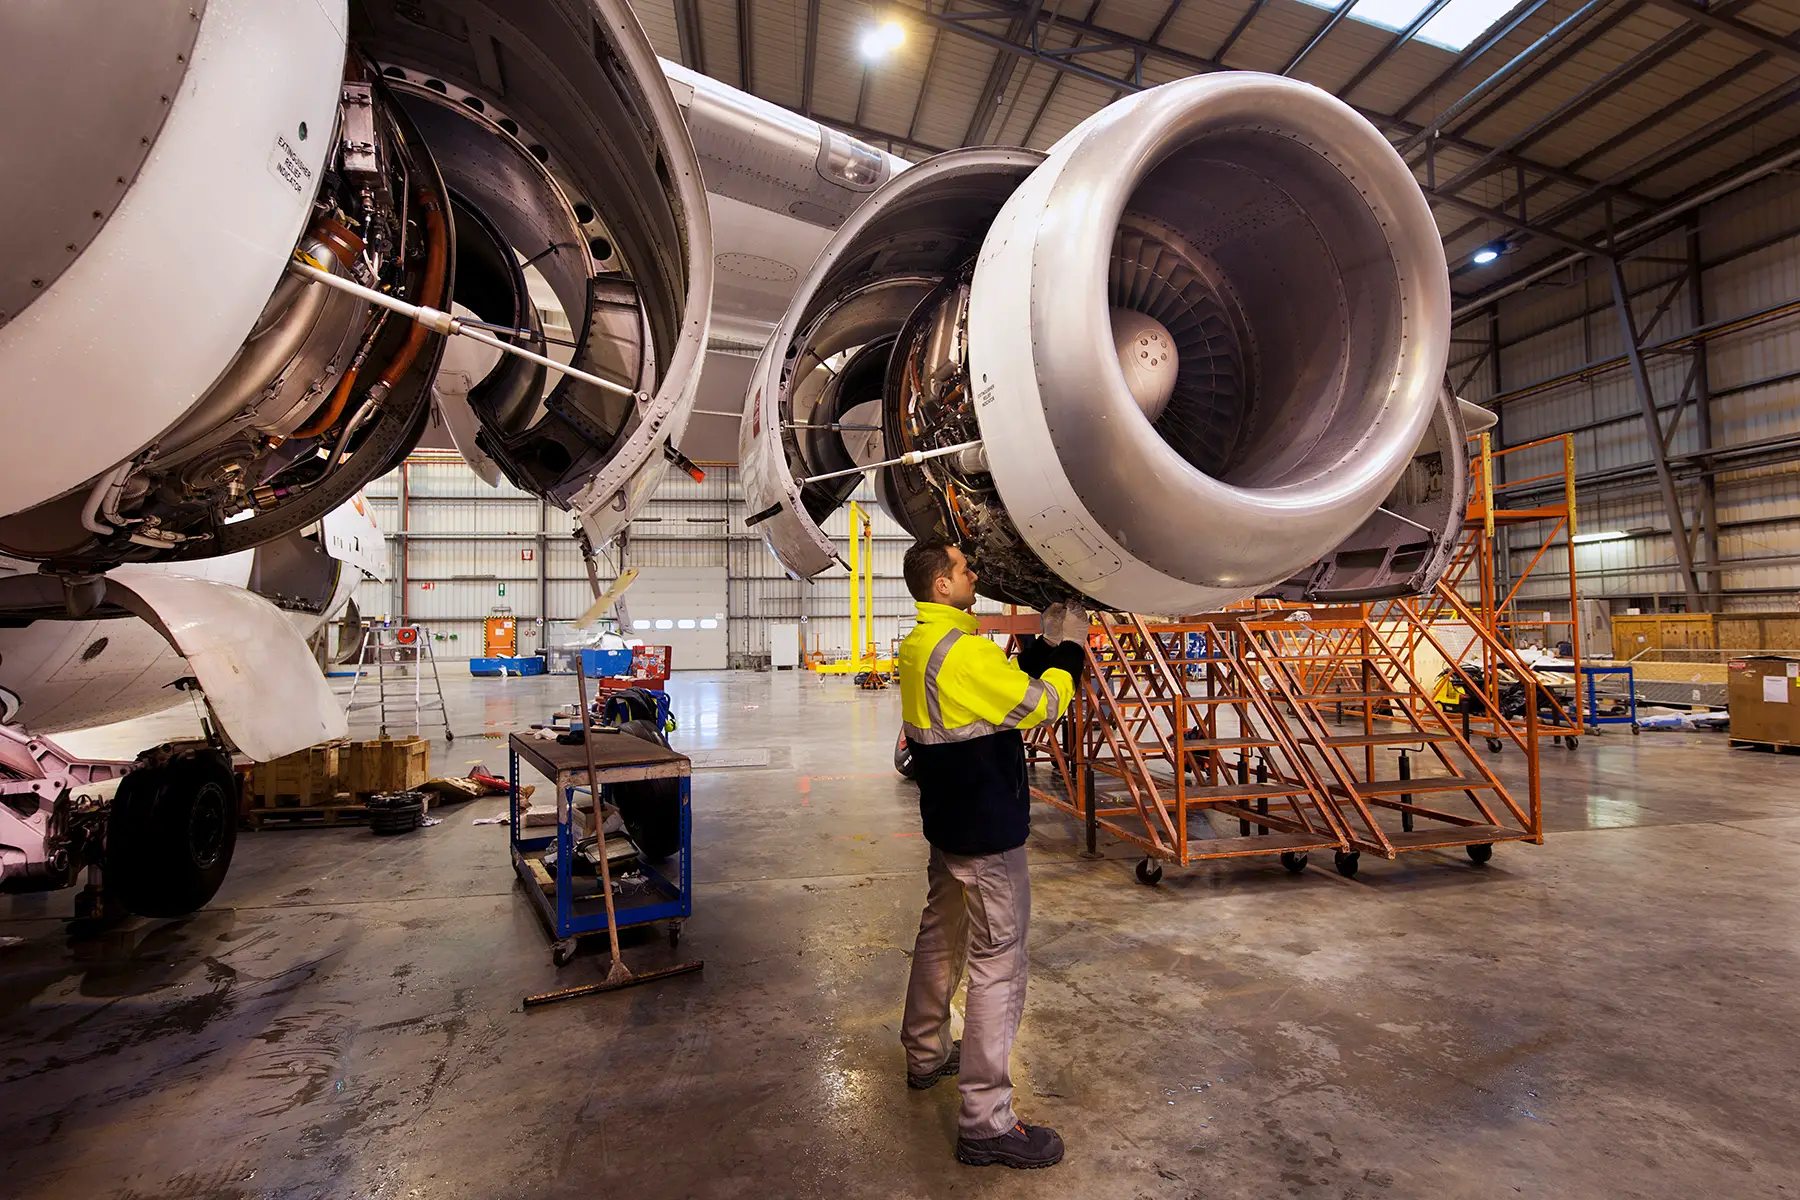 A maintenance worker inspecting an airplane engine